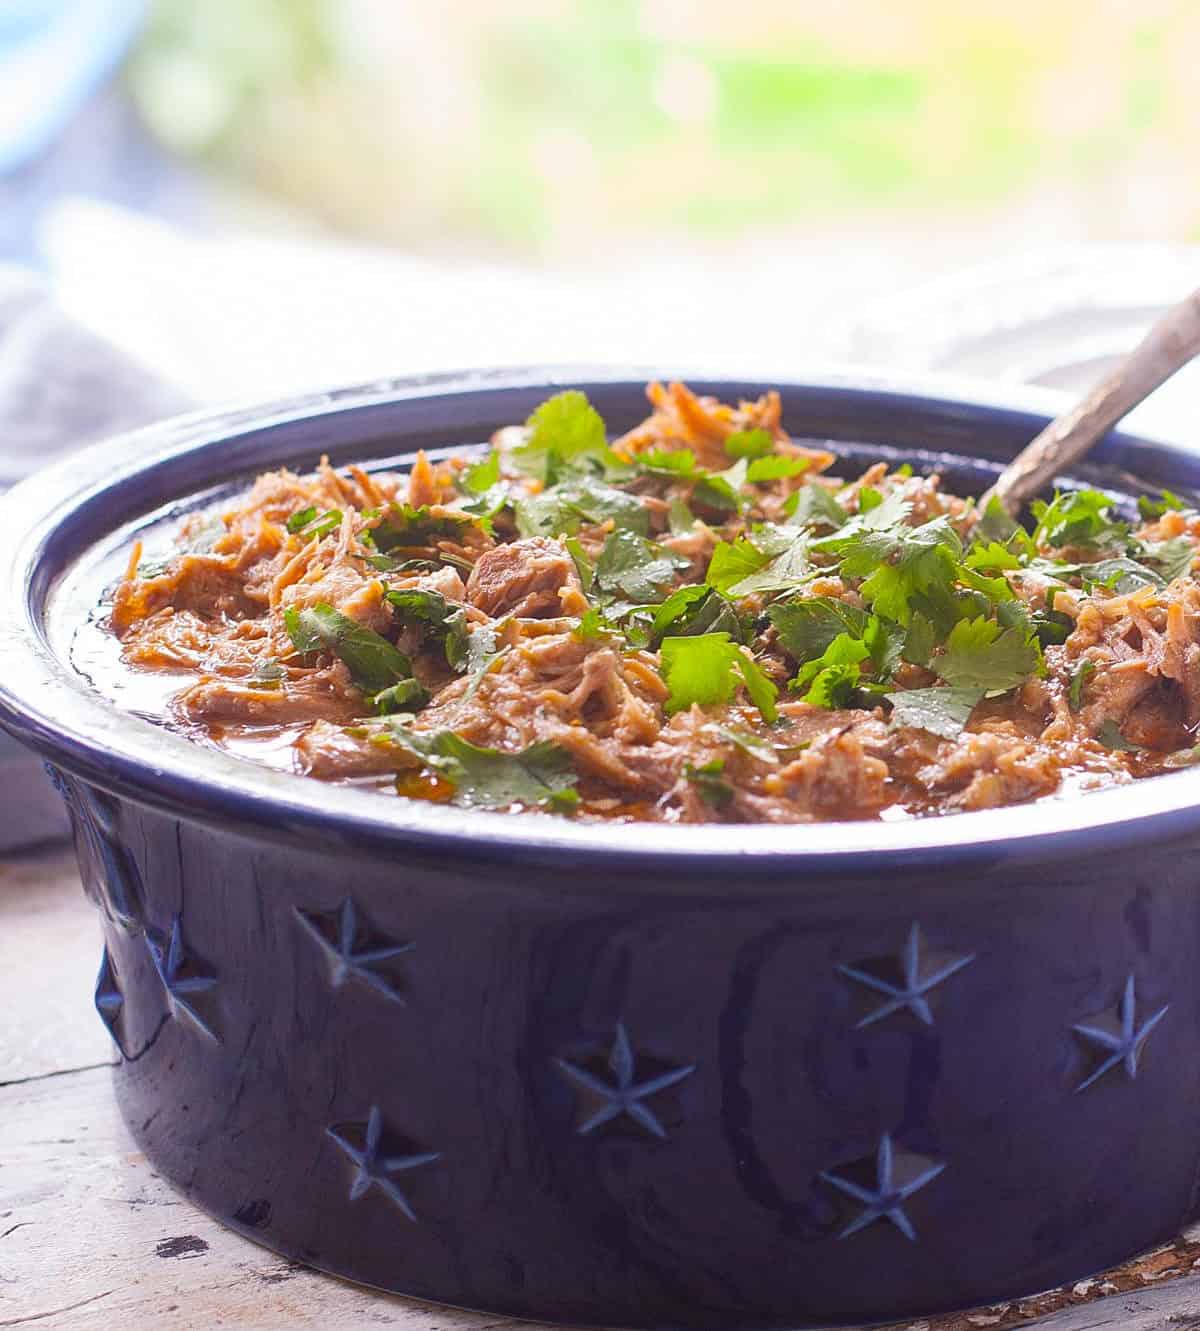  Make your taste buds dance with this authentic Mexican pork dish.